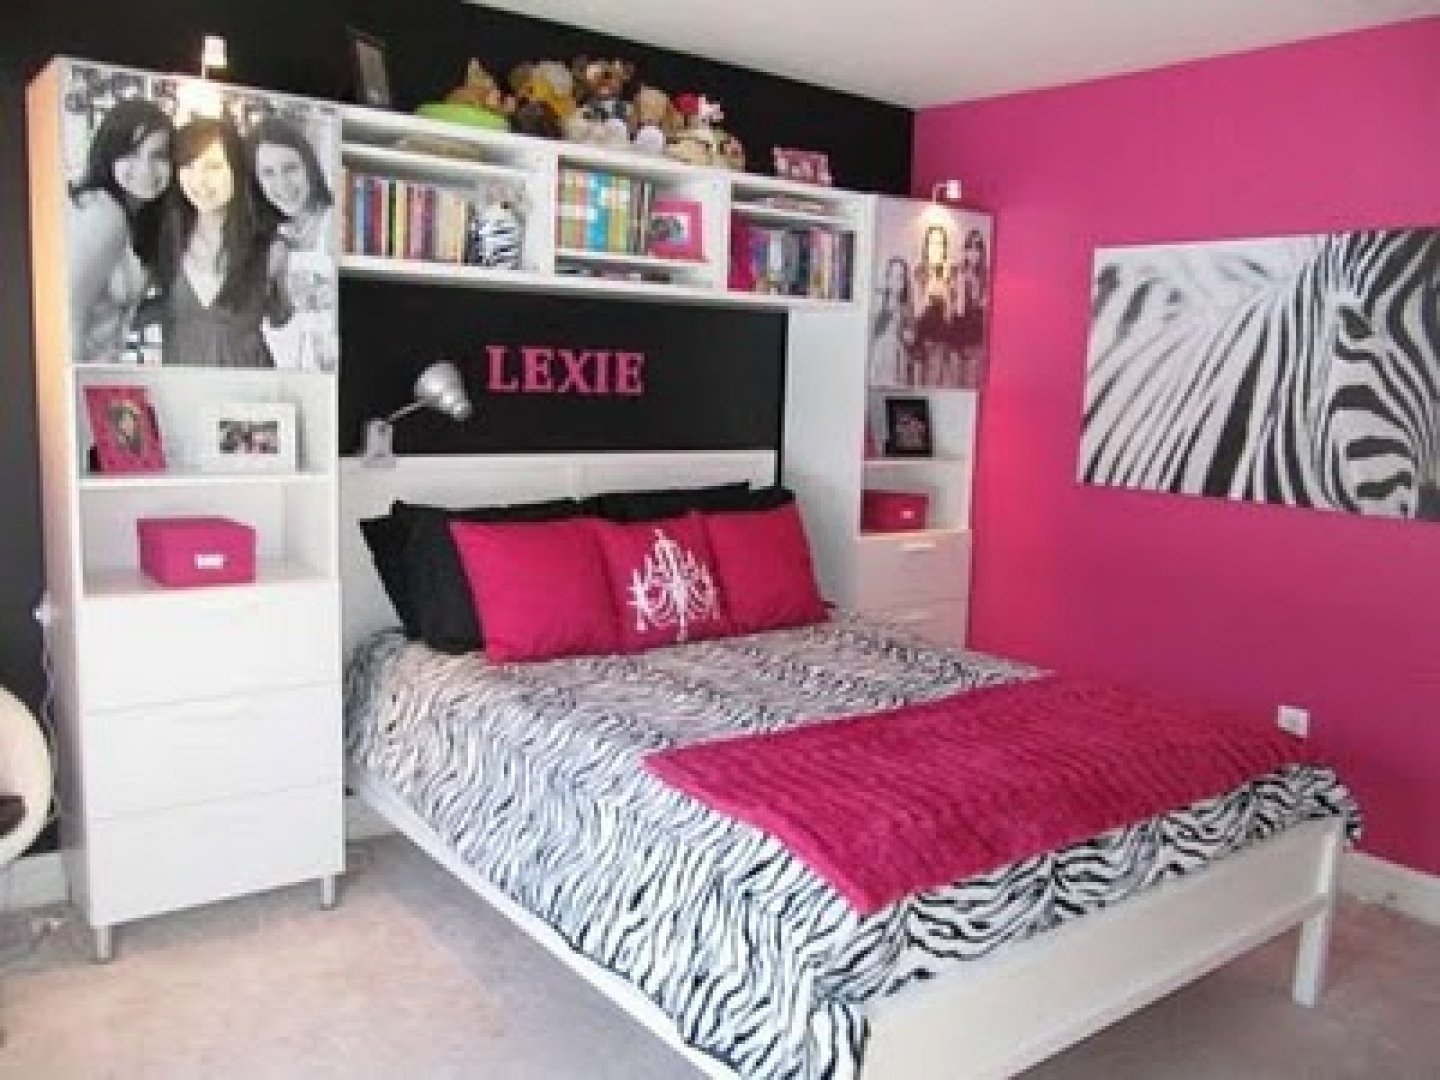 10 Most Recommended Pink Black And White Room Ideas bedroom pink black white e280a2 white bedroom design 2022